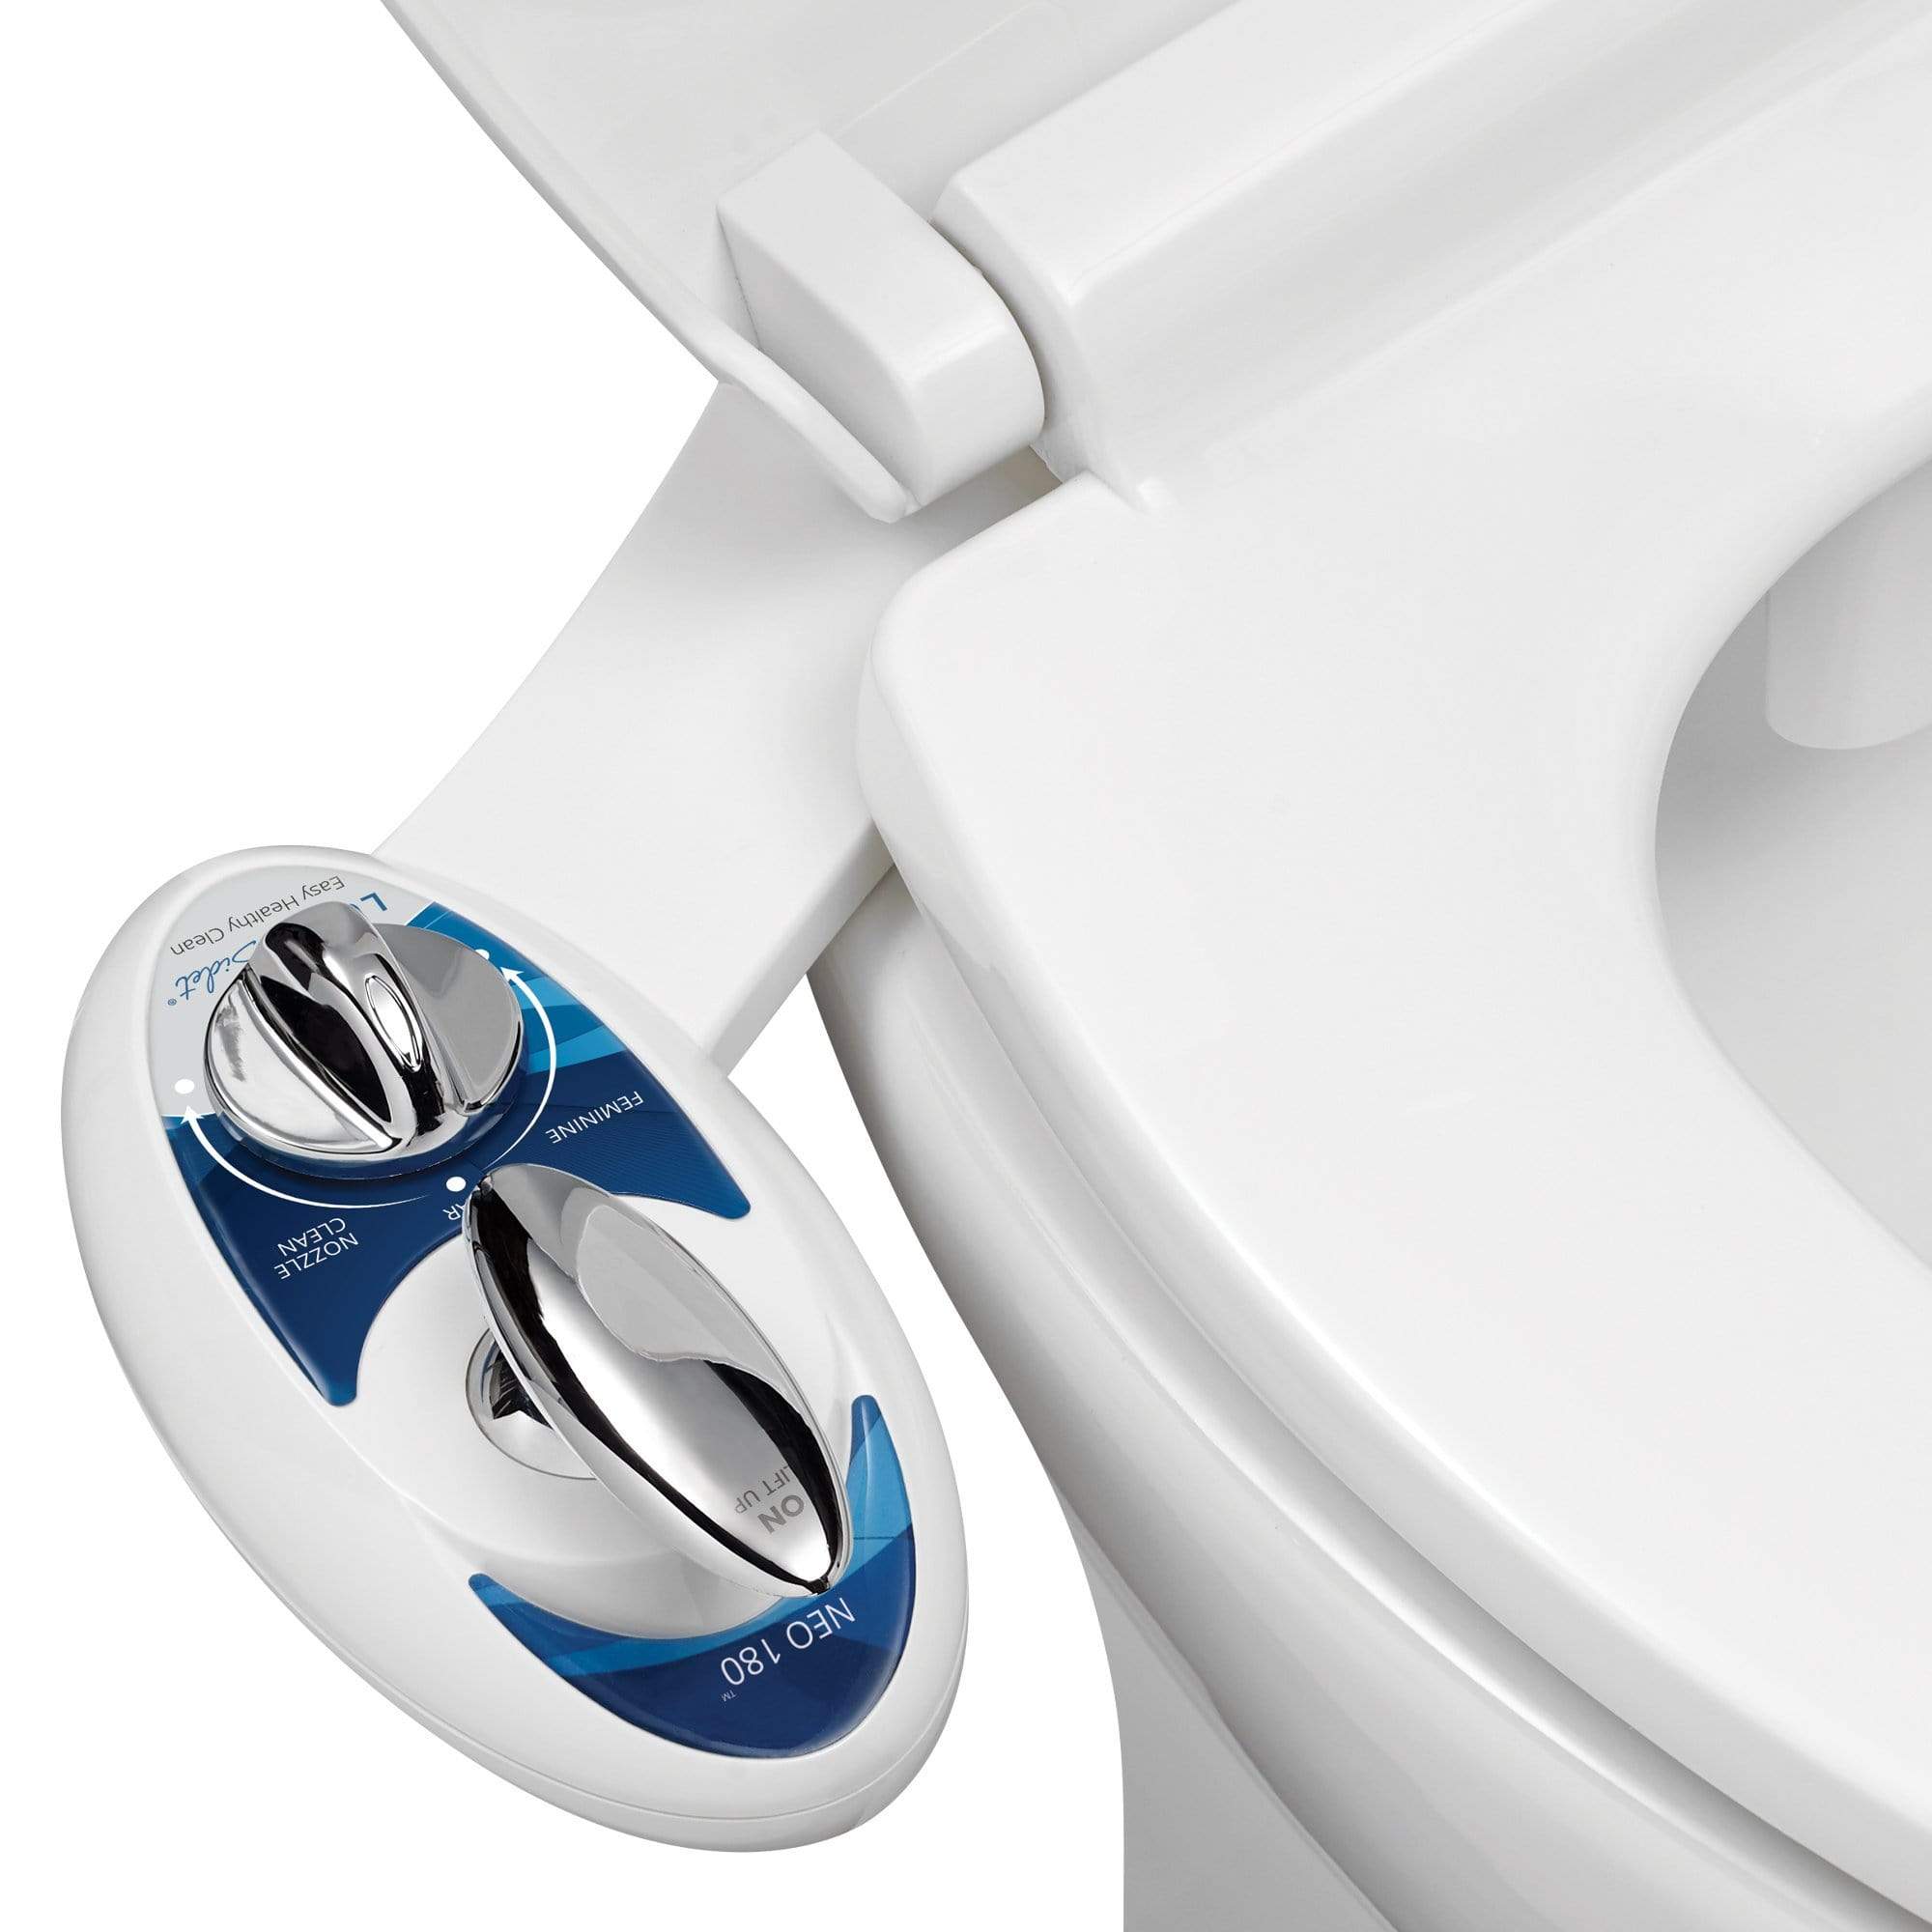 NEO 180 Blue installed on a toilet, open lid